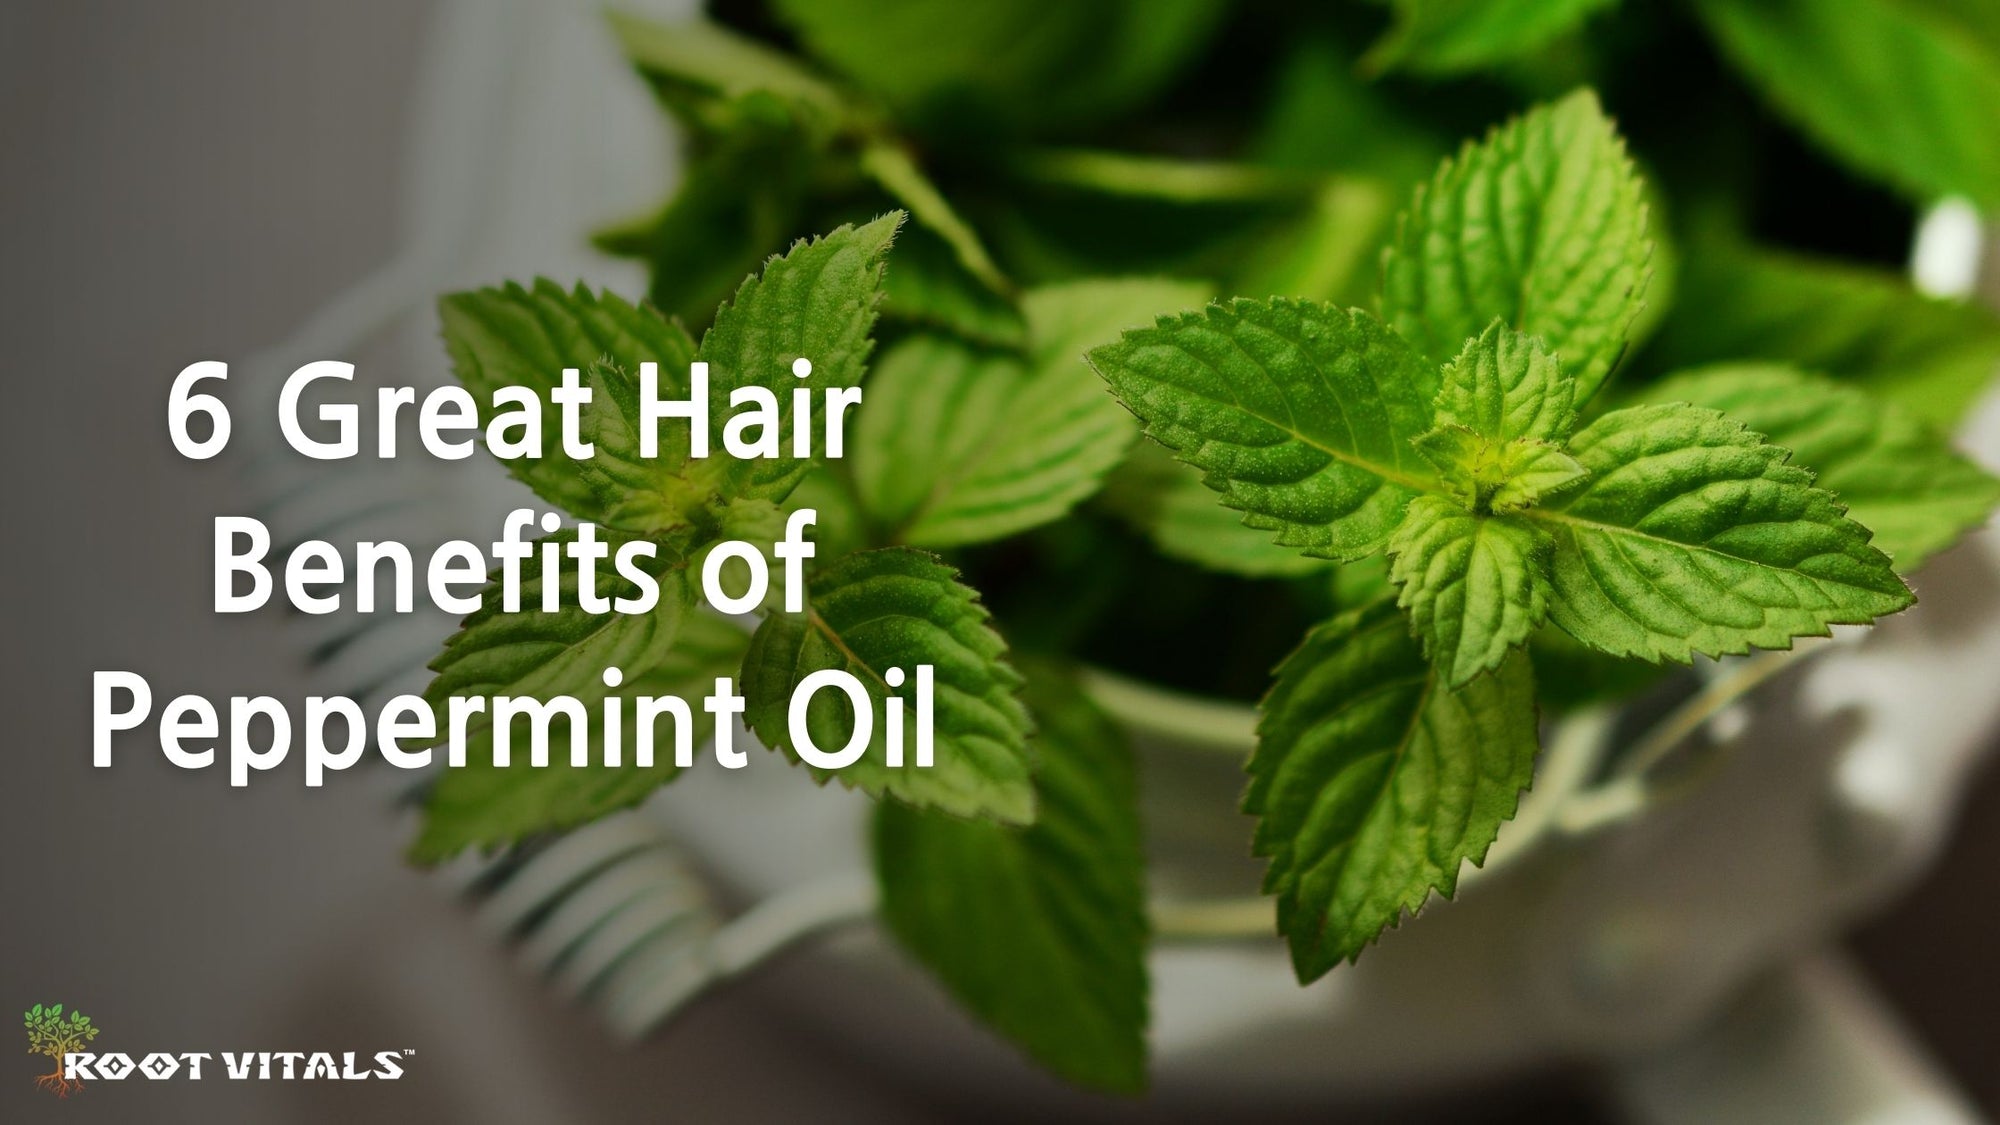 Great Hair Benefits of Peppermint Oil